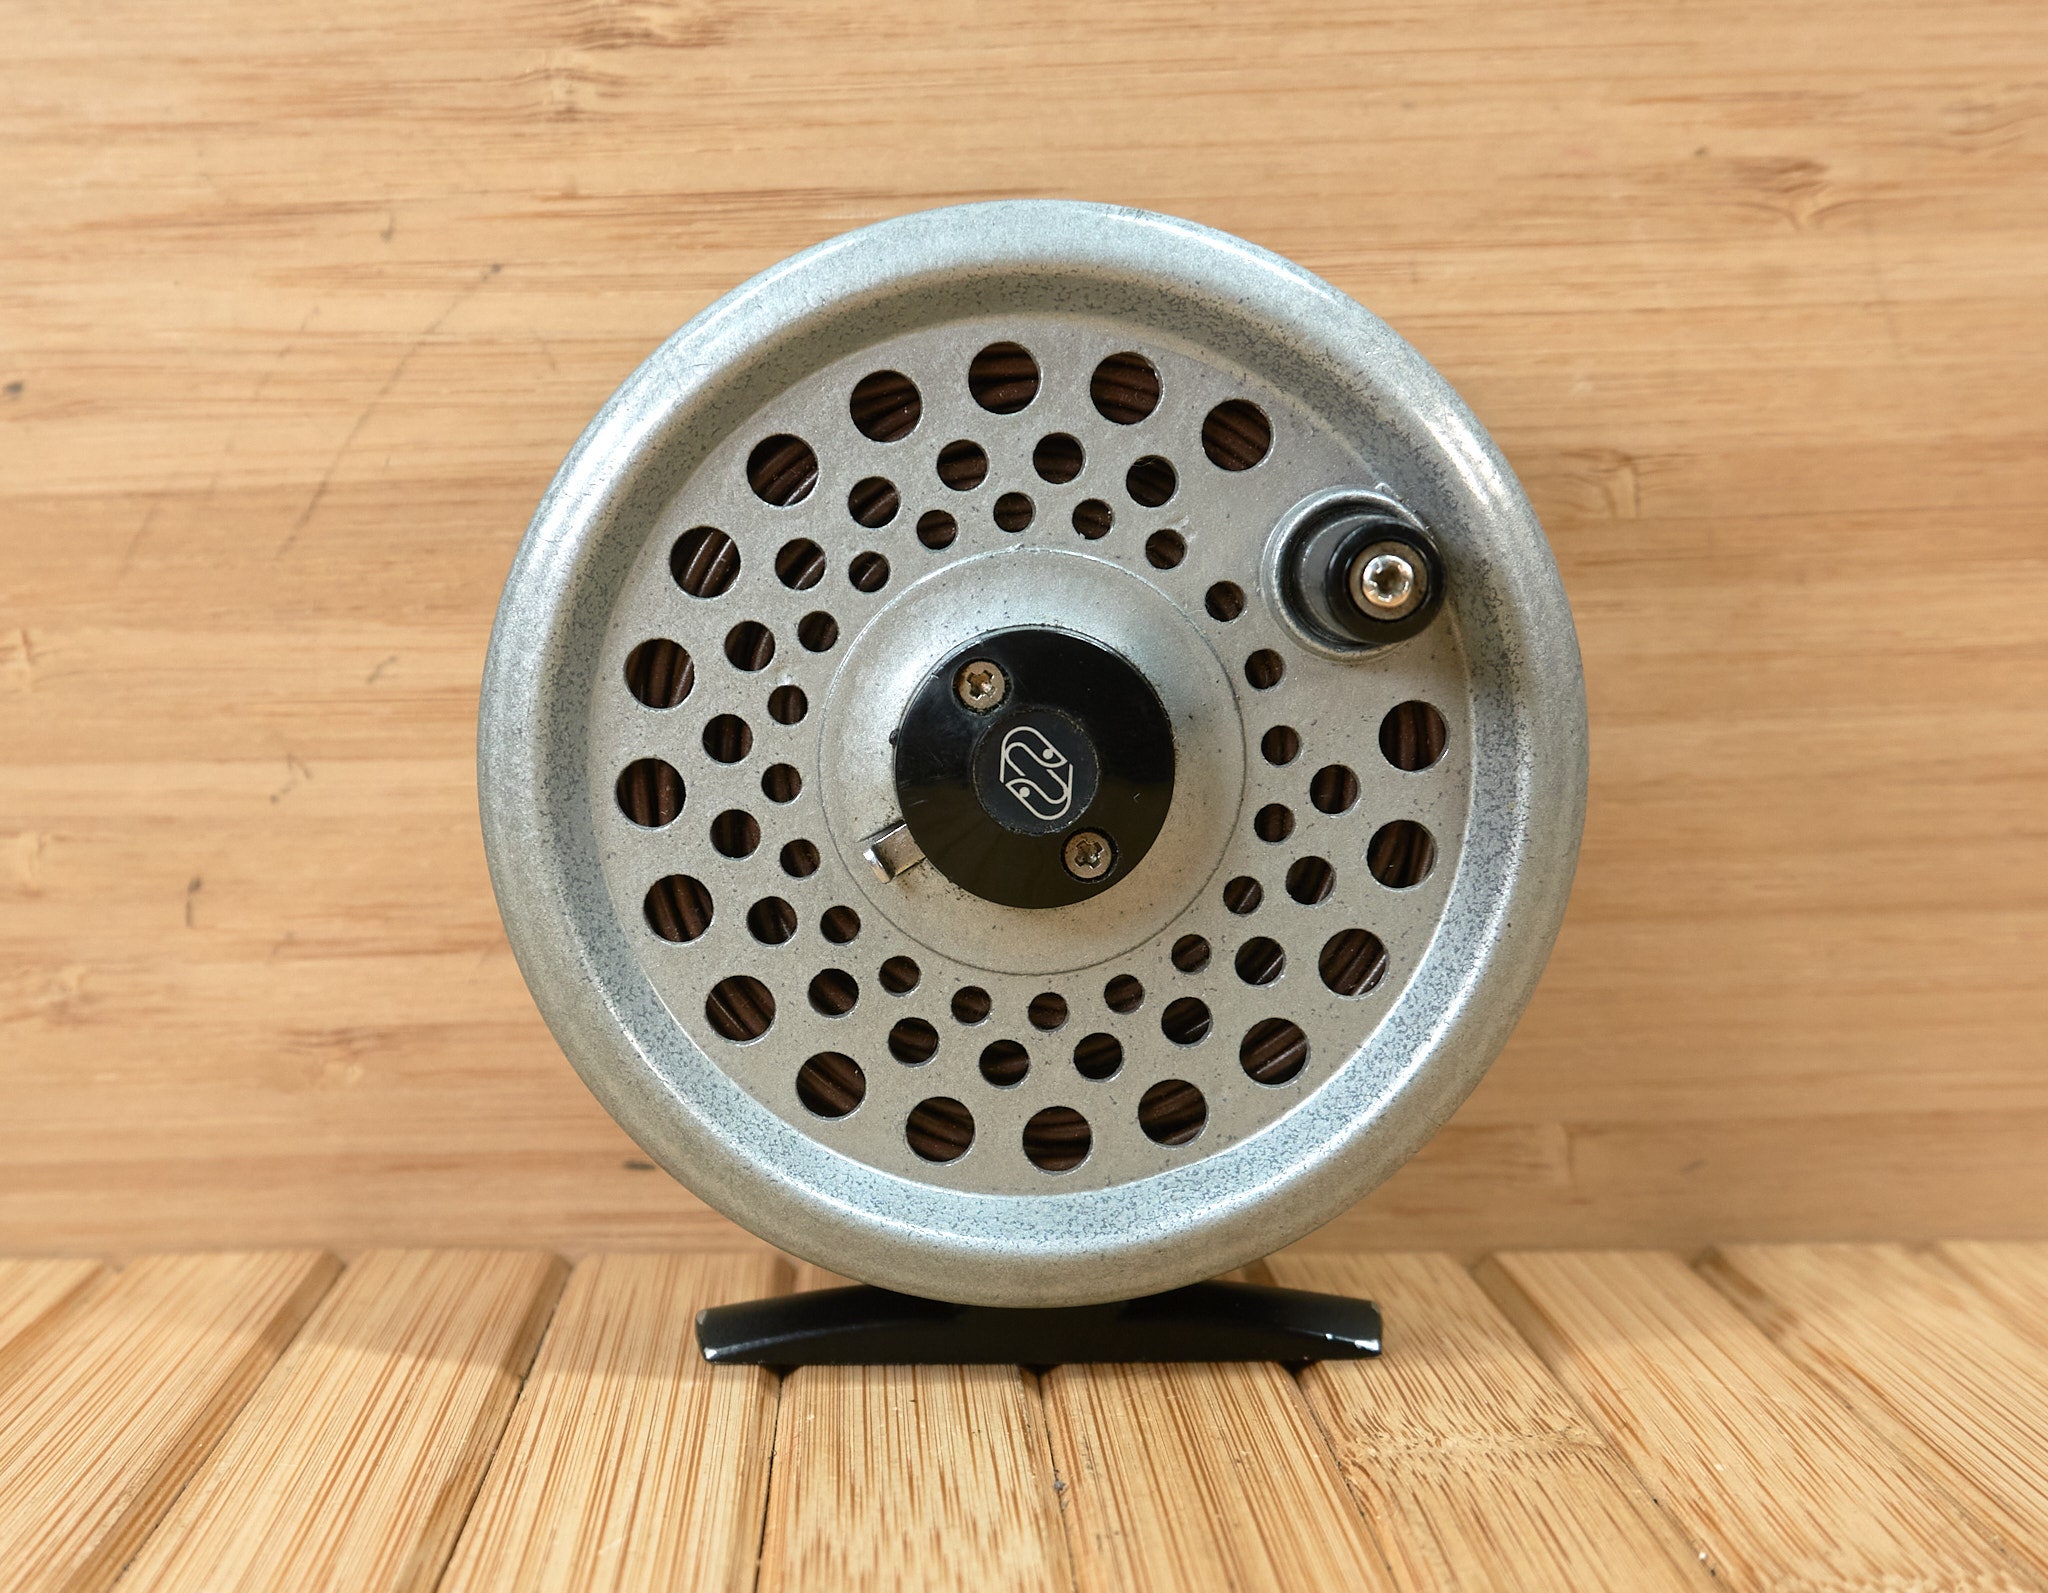 Vintage Intrepid Rimfly Fly Fishing Reel, Made in England 